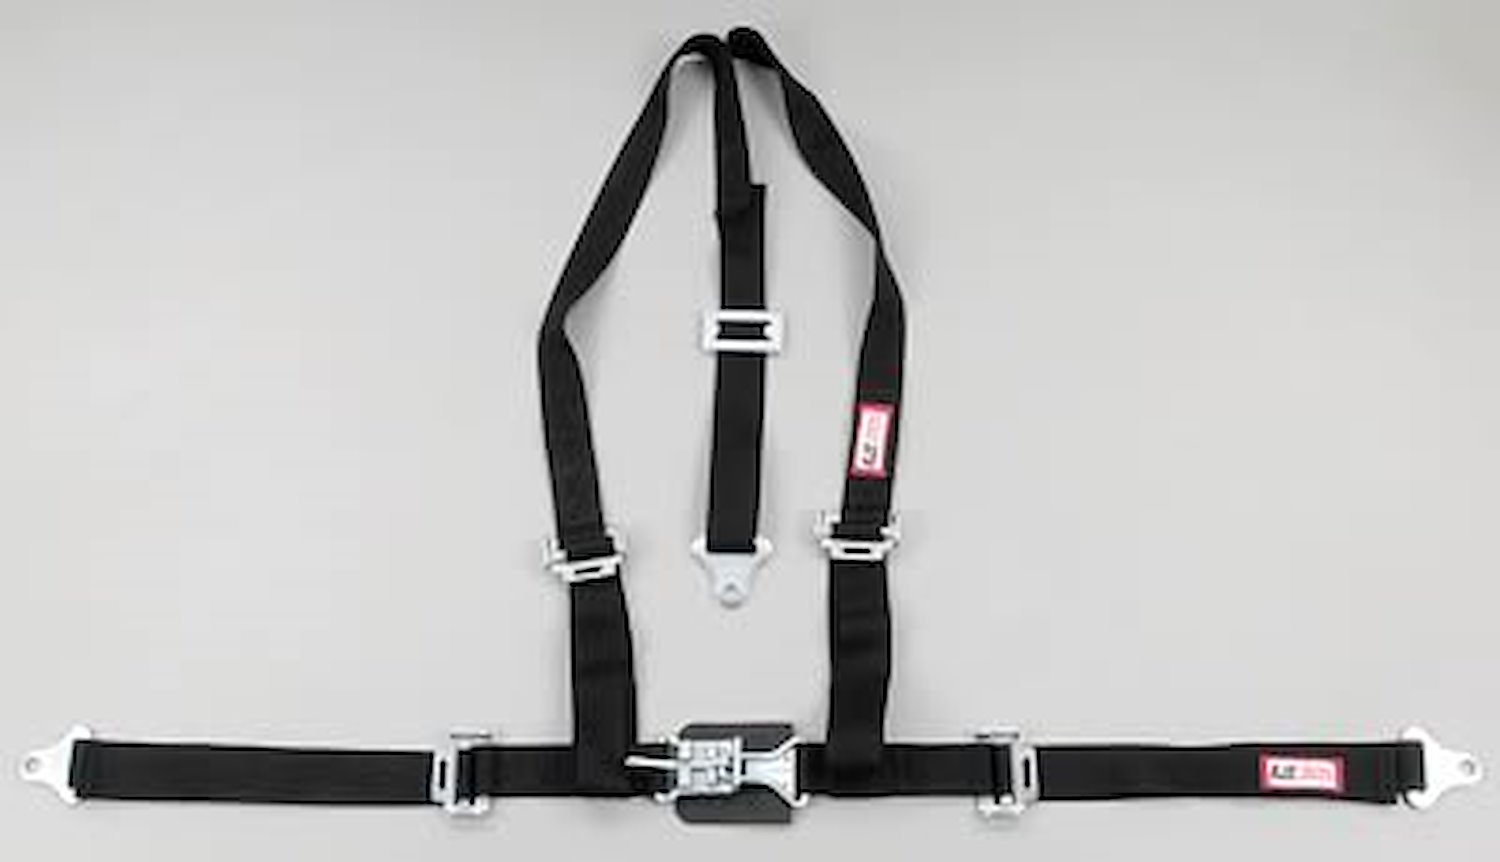 NON-SFI L&L HARNESS 2 PULL UP Lap Belt SEWN IN 2 S.H. V ROLL BAR Mount w/STERNUM STRAP ALL WRAP ENDS BLACK